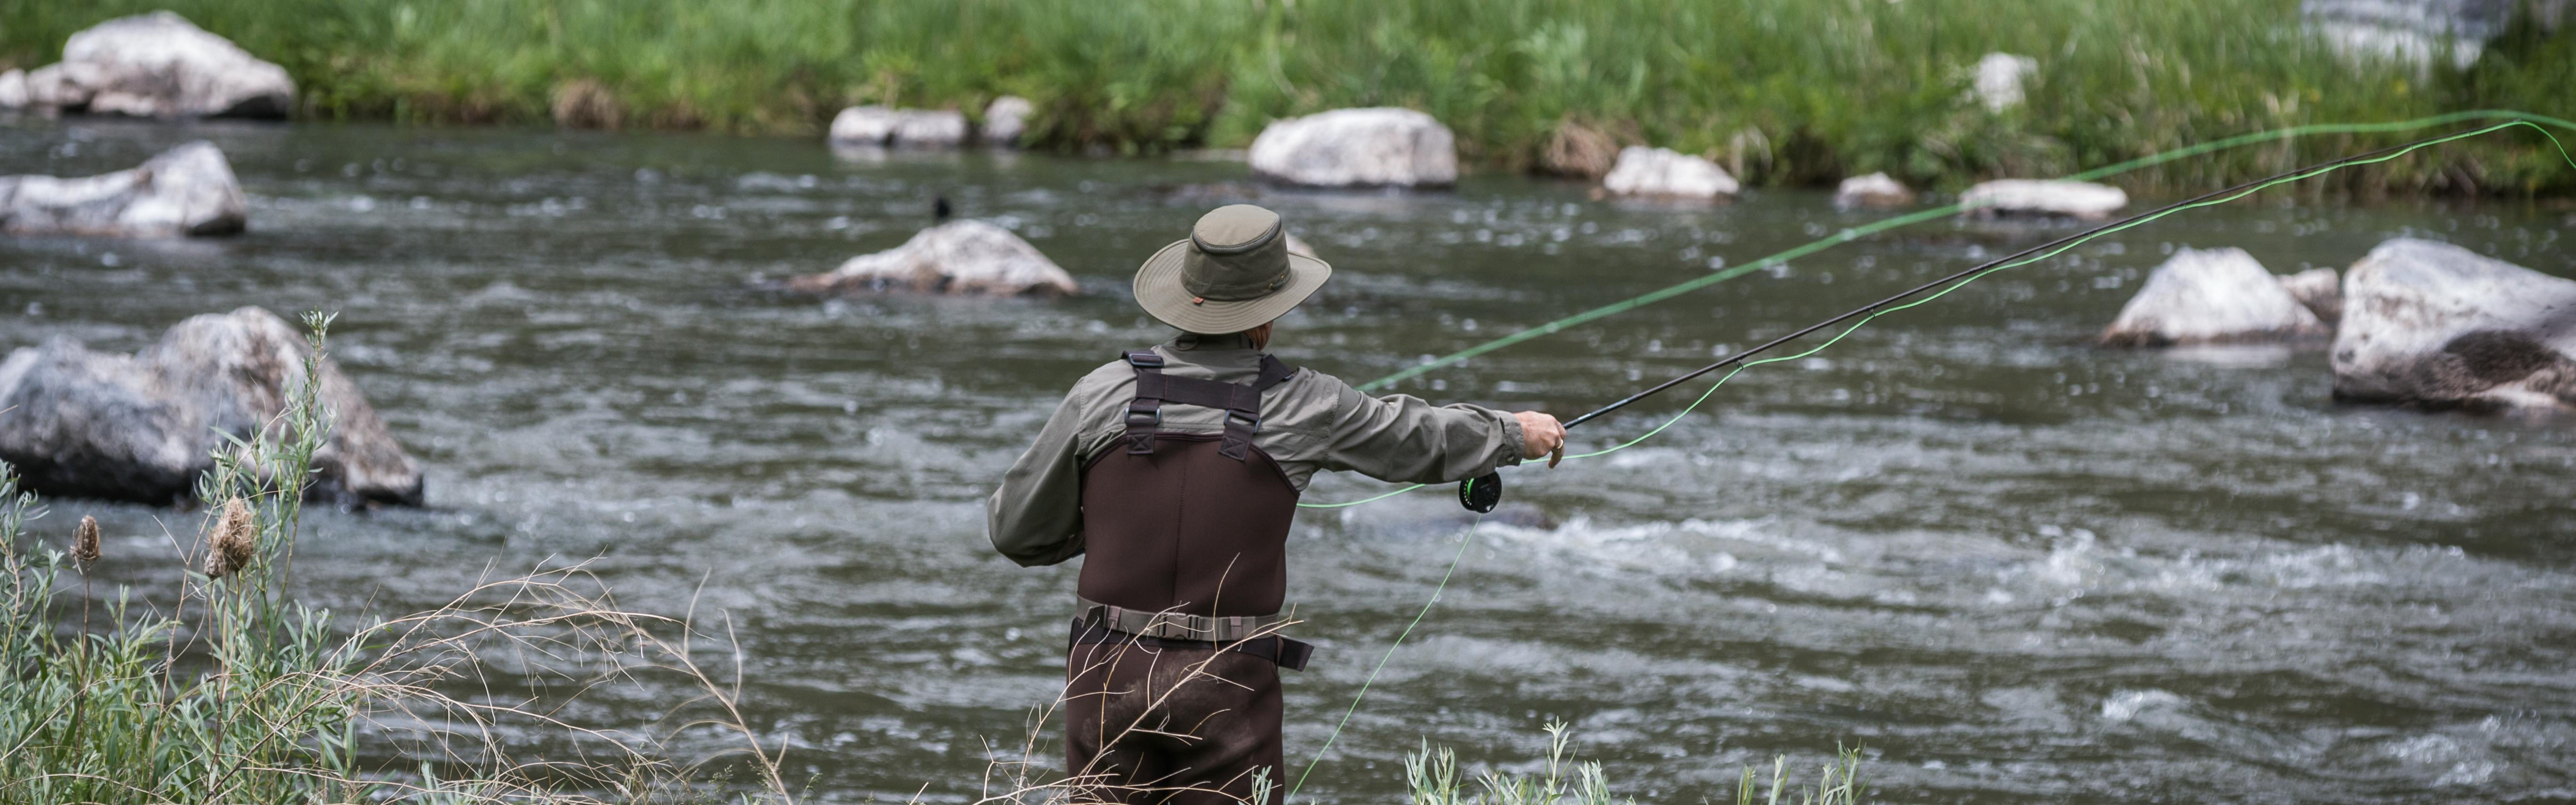 A man is fly fishing and standing in a river with waders on. 